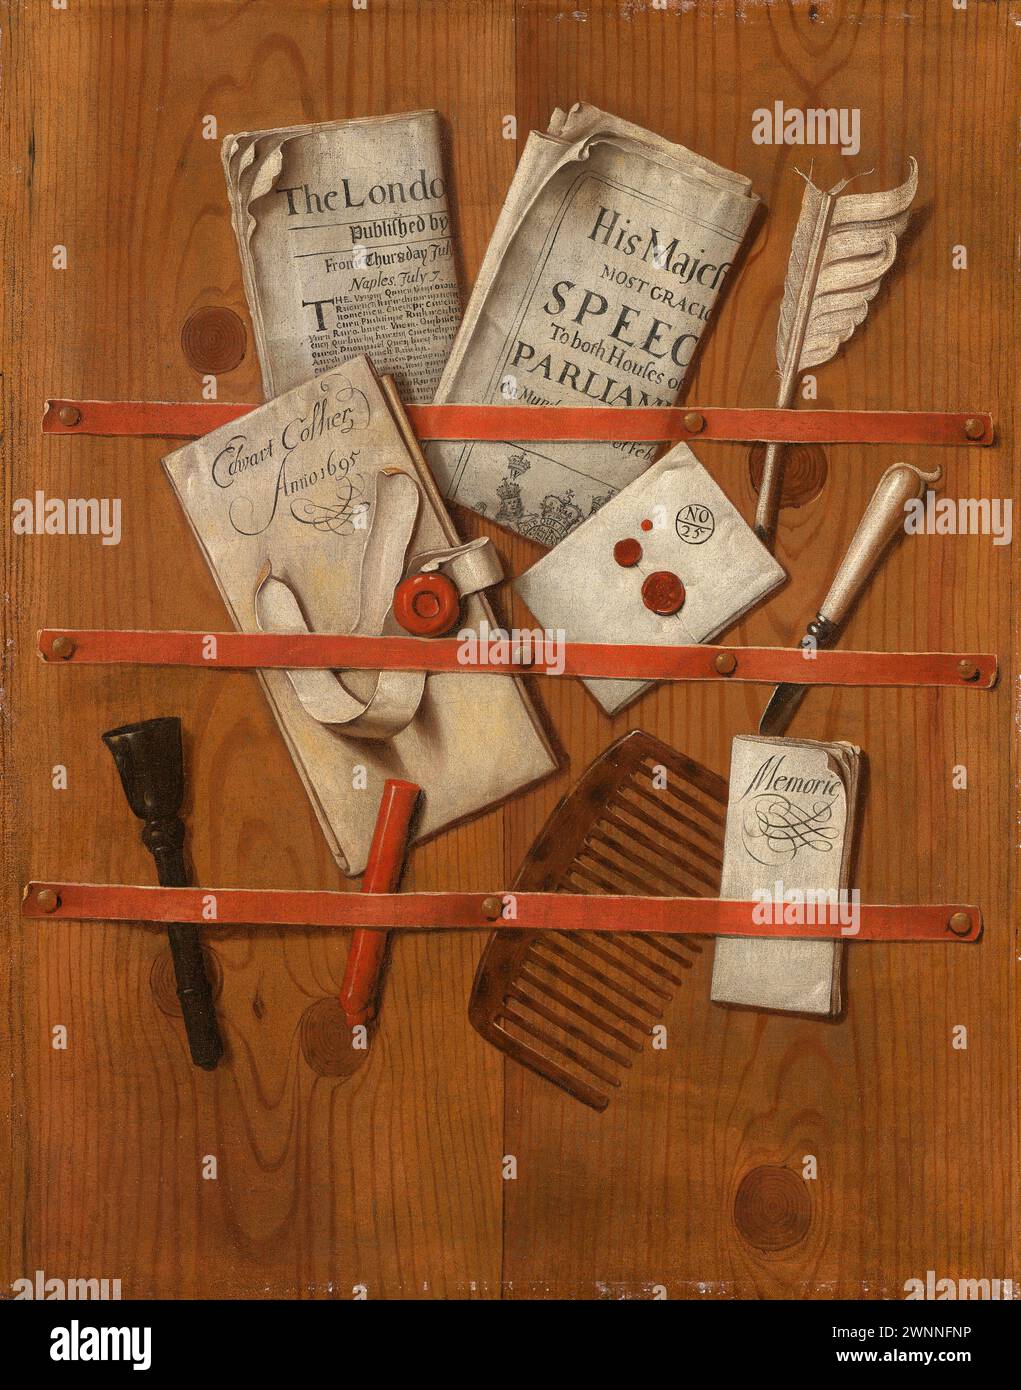 A Letter Rack.  Edward Collier. 1695. Stock Photo